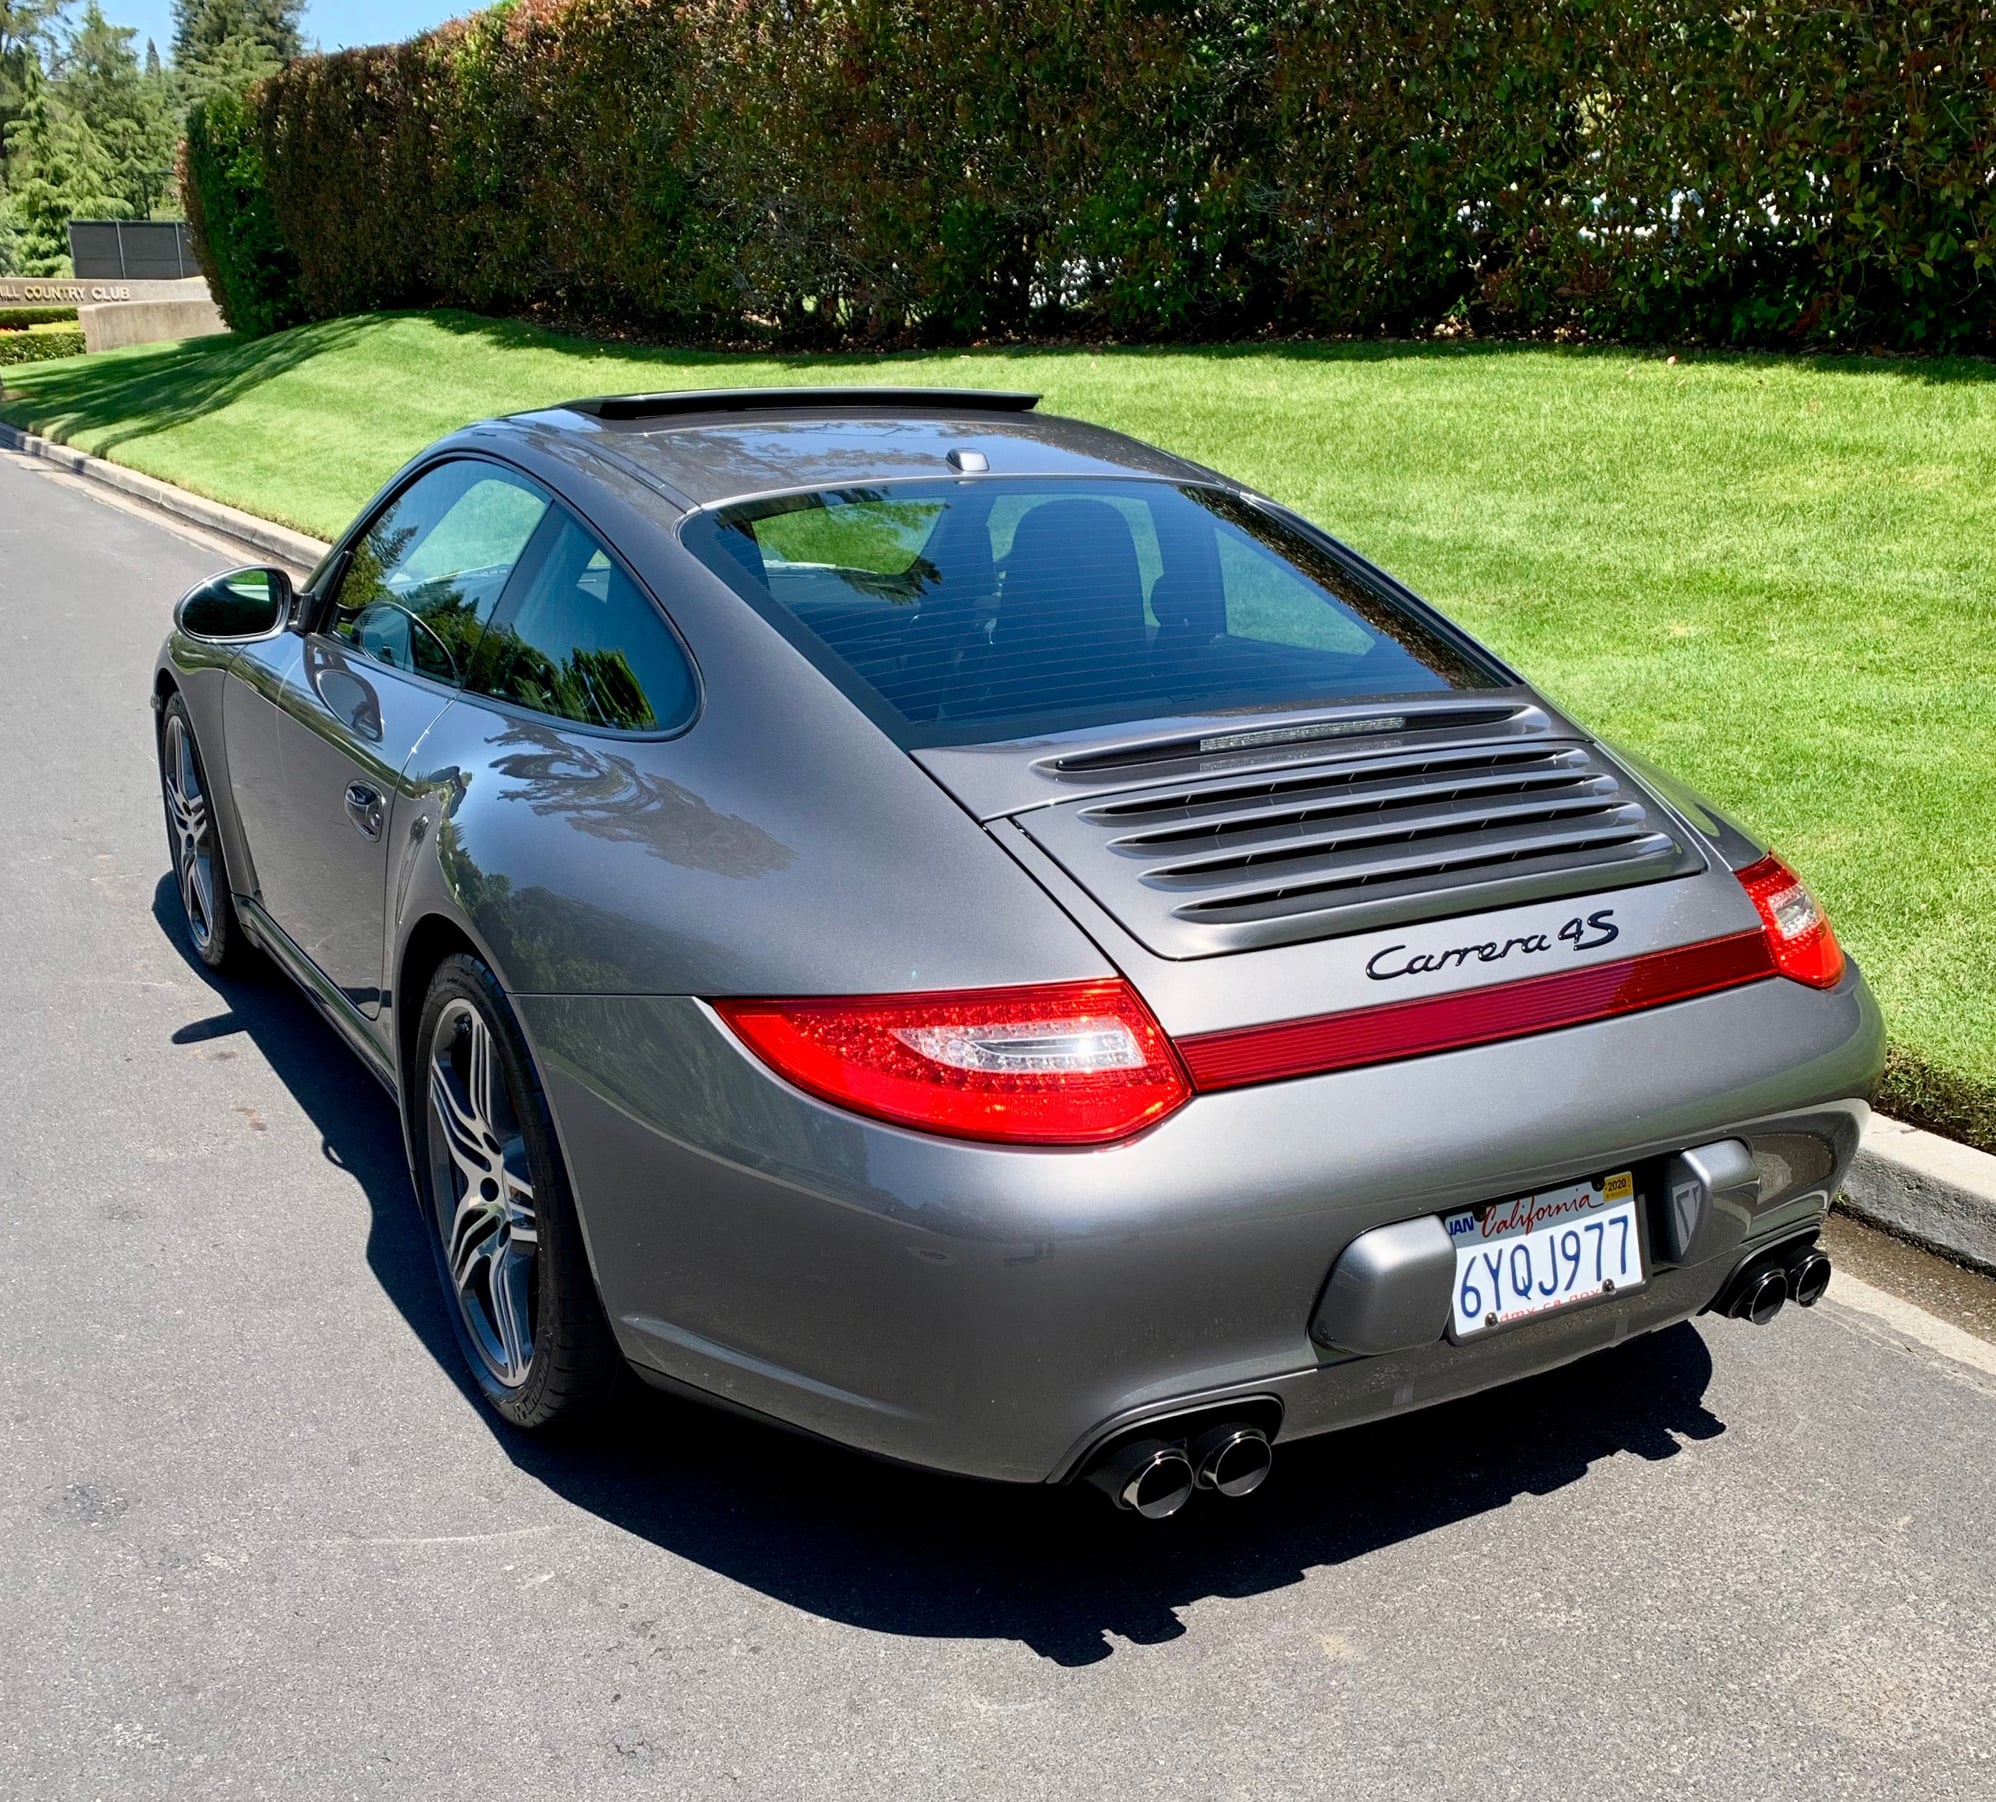 2010 Porsche 911 - 2010 Carrera 4S 6 speed Coupe.  47K miles, Meteor Grey Metallic/Black leather. - Used - VIN WP0AB2A91AS720615 - 47,000 Miles - 6 cyl - AWD - Manual - Coupe - Gray - Danville, CA 94526, United States